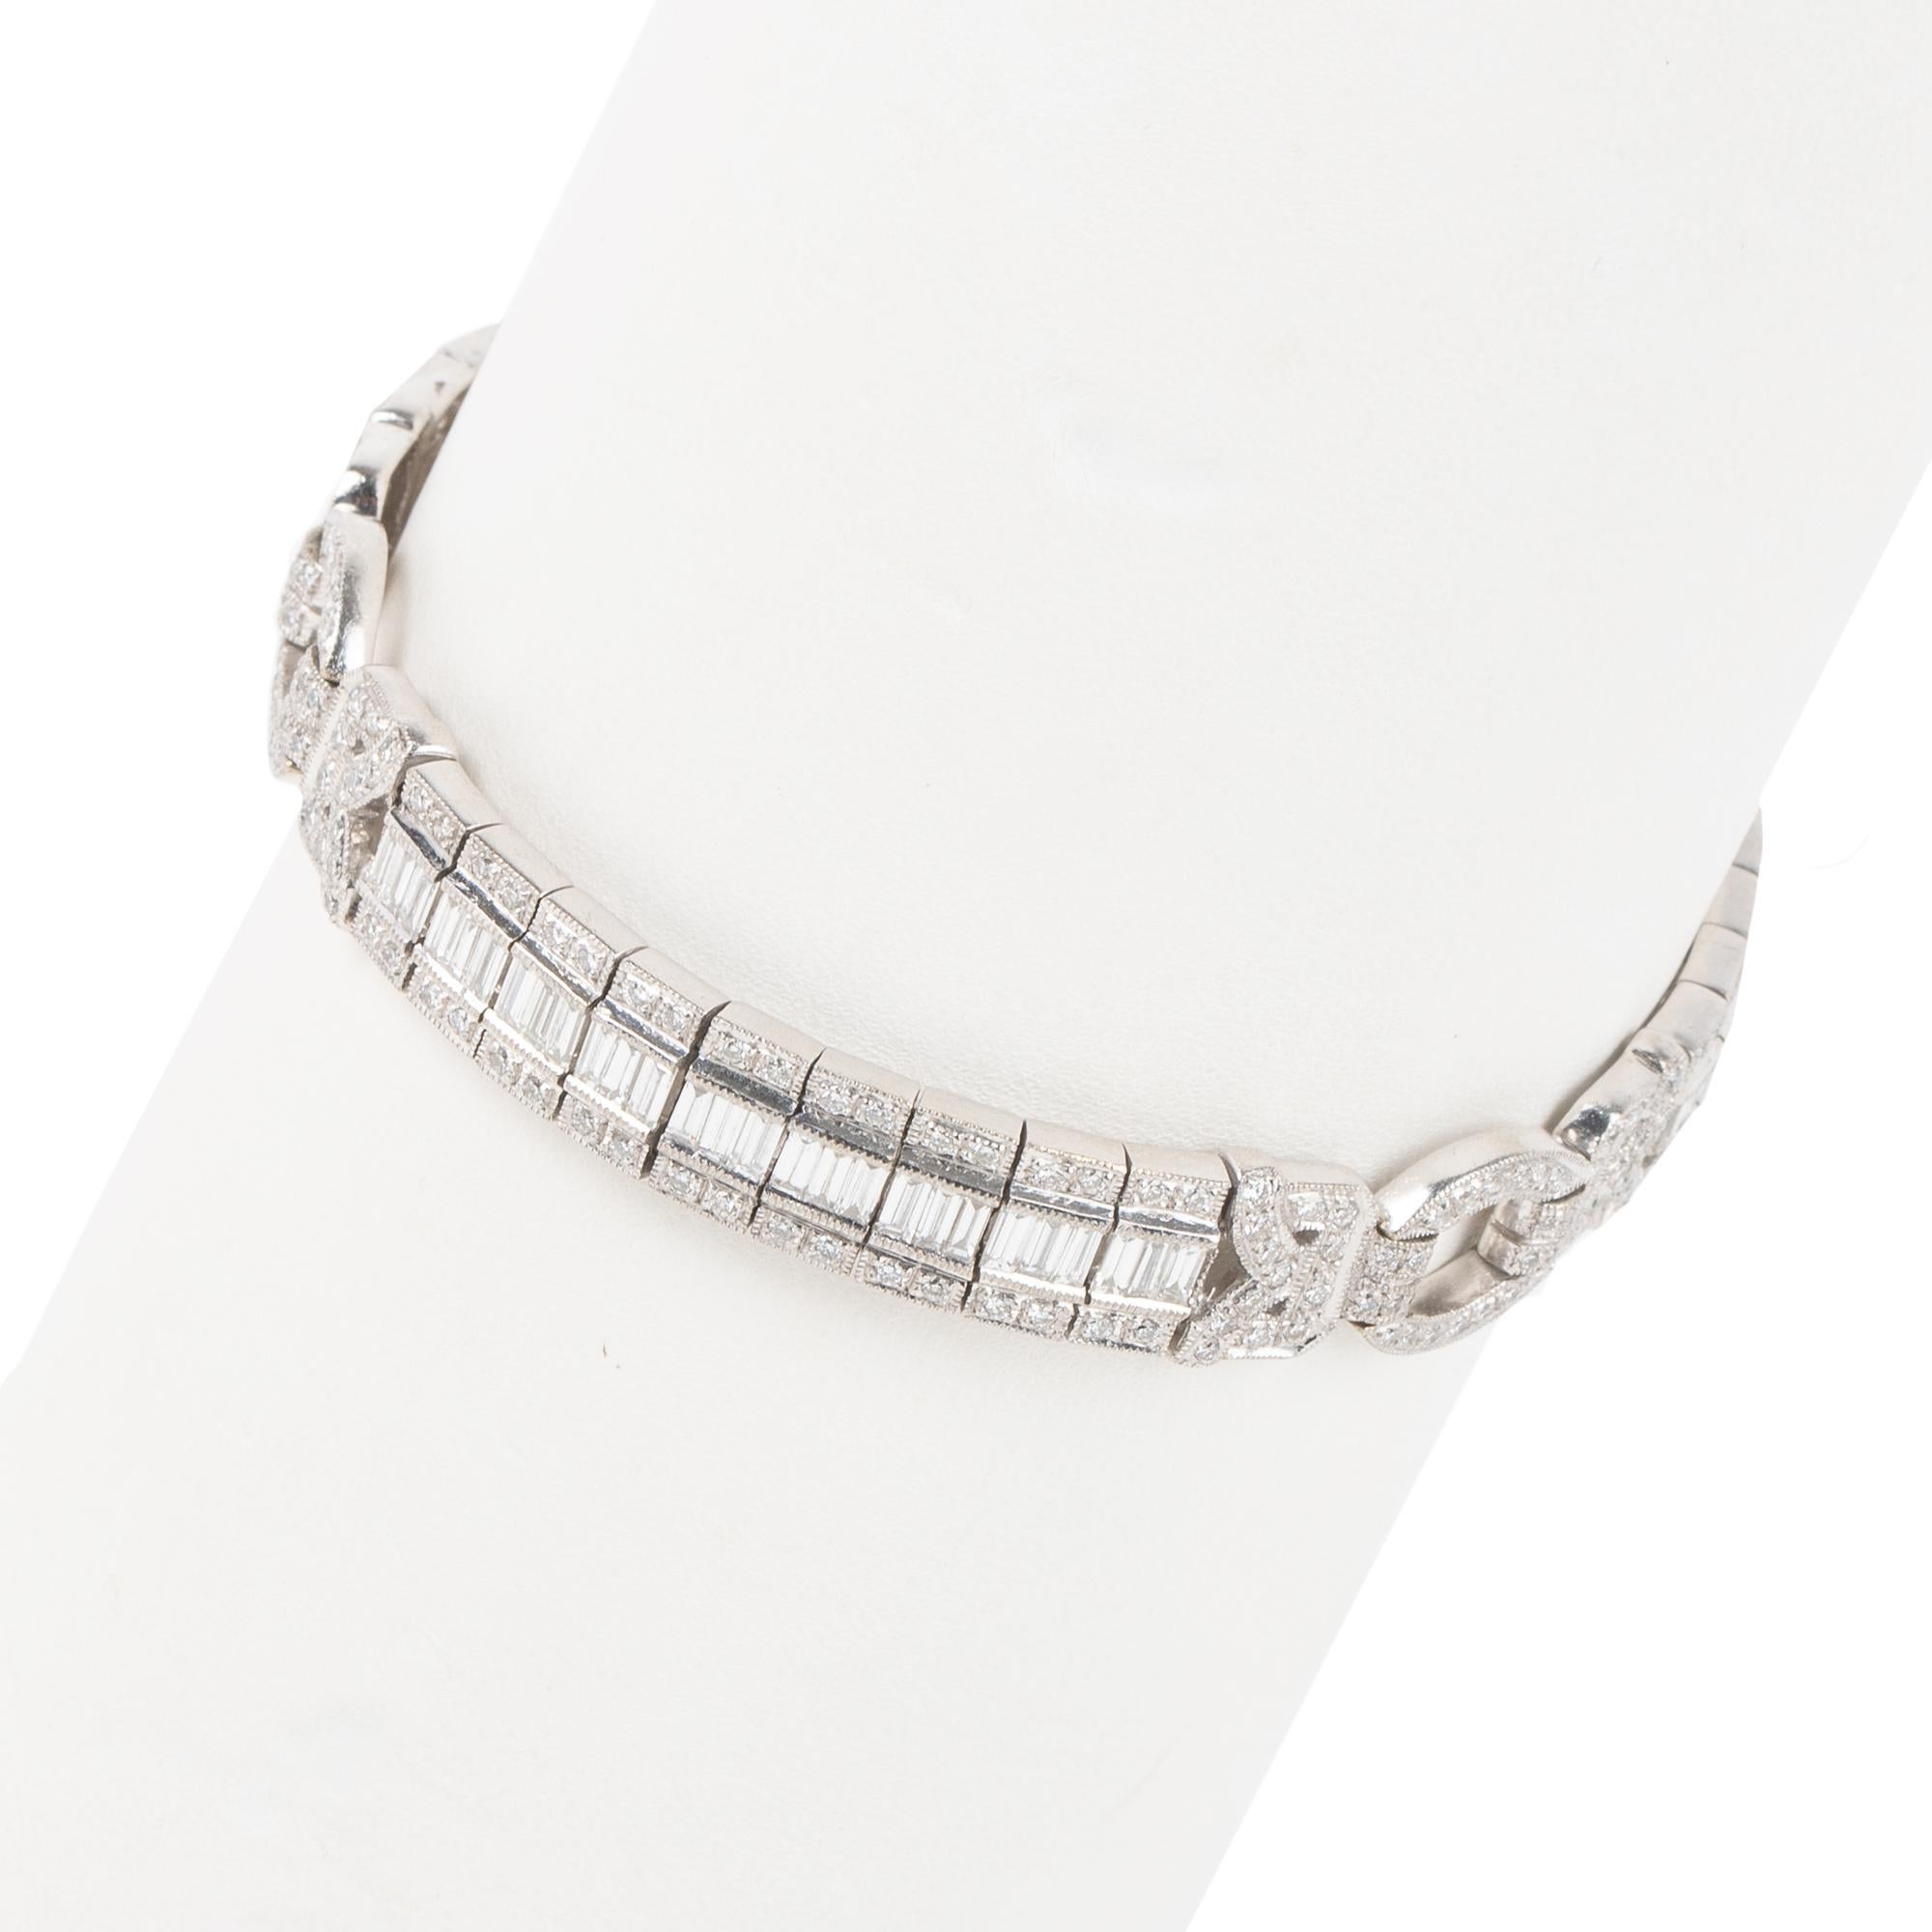 This special bracelet shows art deco style at its best. The diamonds are round and baguette cut set in 18k white gold.

Appraisal - $14,900
Diamond weight - 8.5 carats